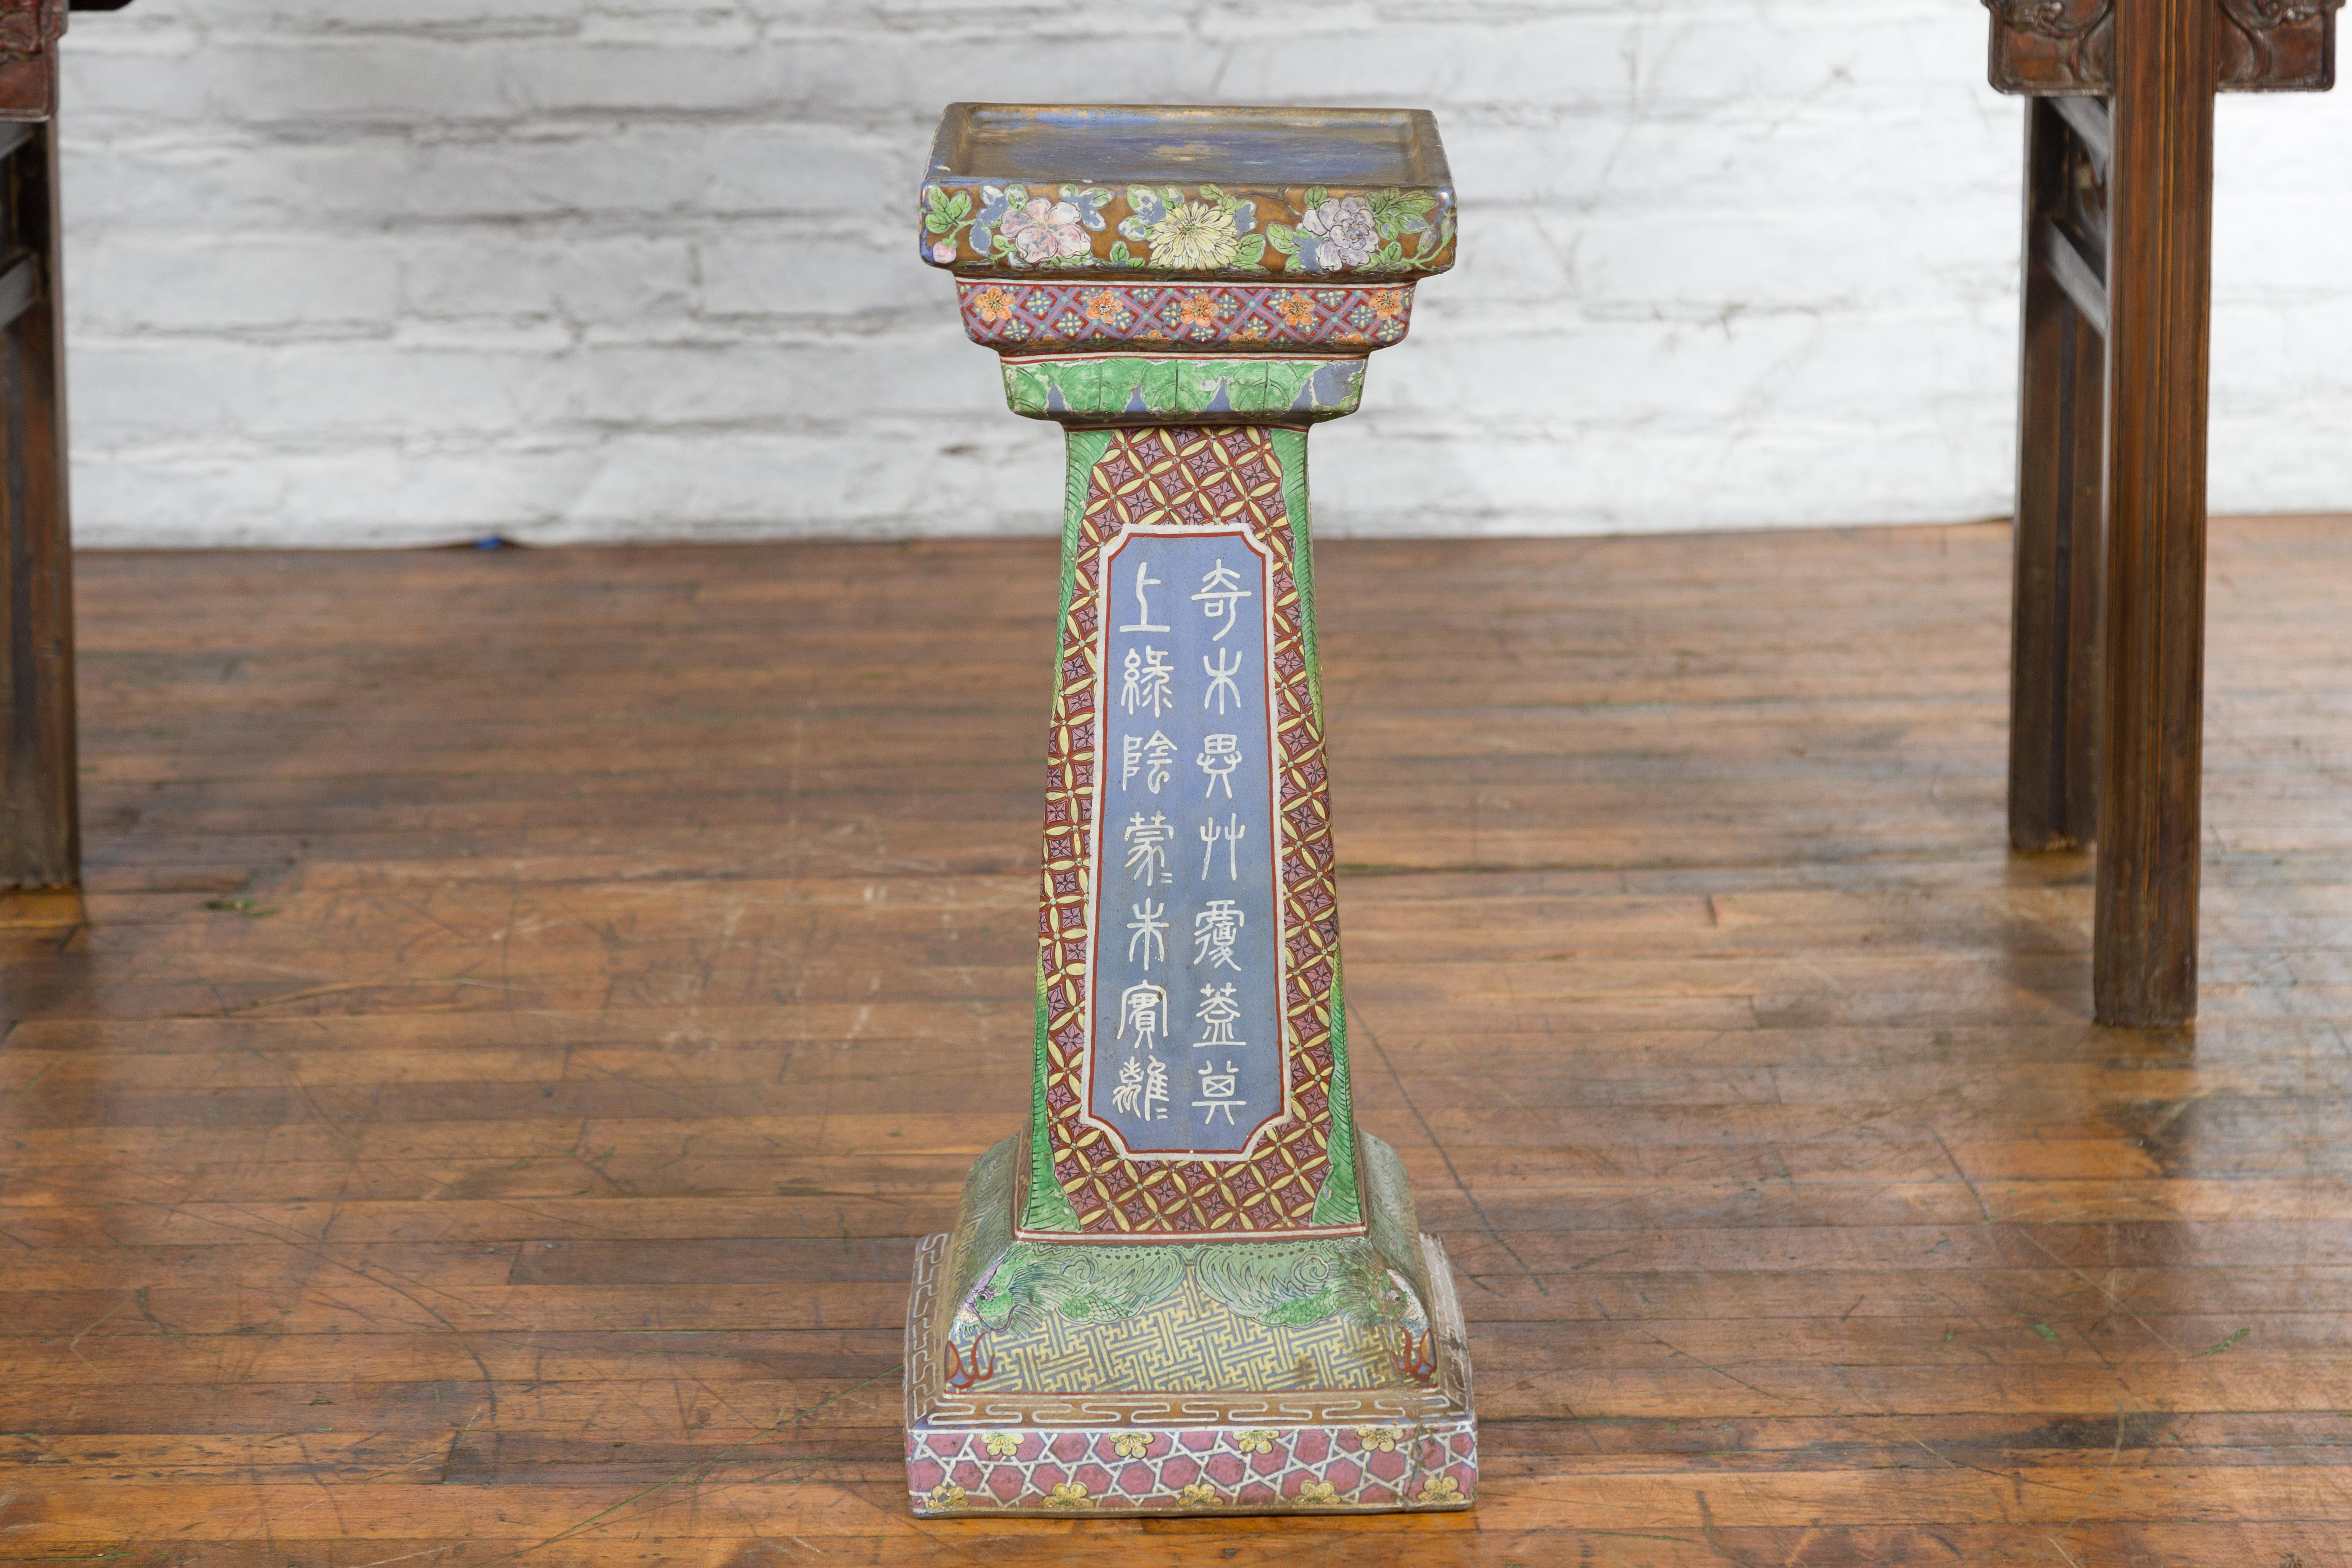 A vintage Chinese blue glazed ceramic pedestal from the mid 20th century, with calligraphy and male figures in landscapes. Created in China during the mid-century period, this pedestal stand features a stepped square top with recessed blue glazed